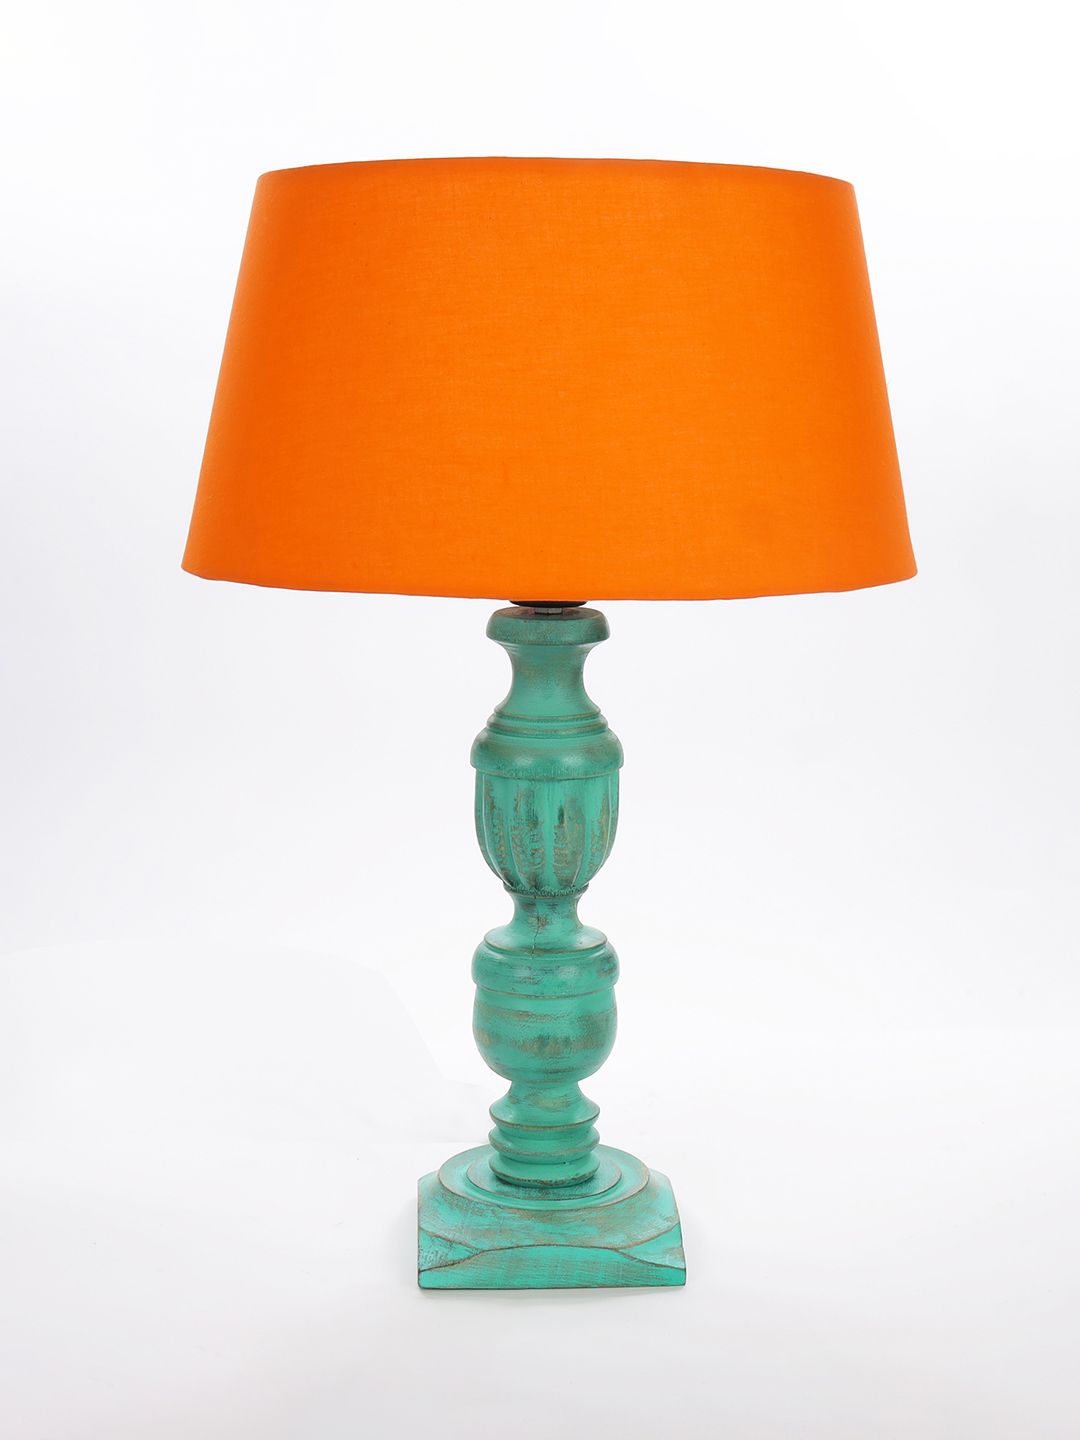 Homesake Orange & Green Contemporary Handcrafted Bedside Standard Table Lamp with Shade Price in India